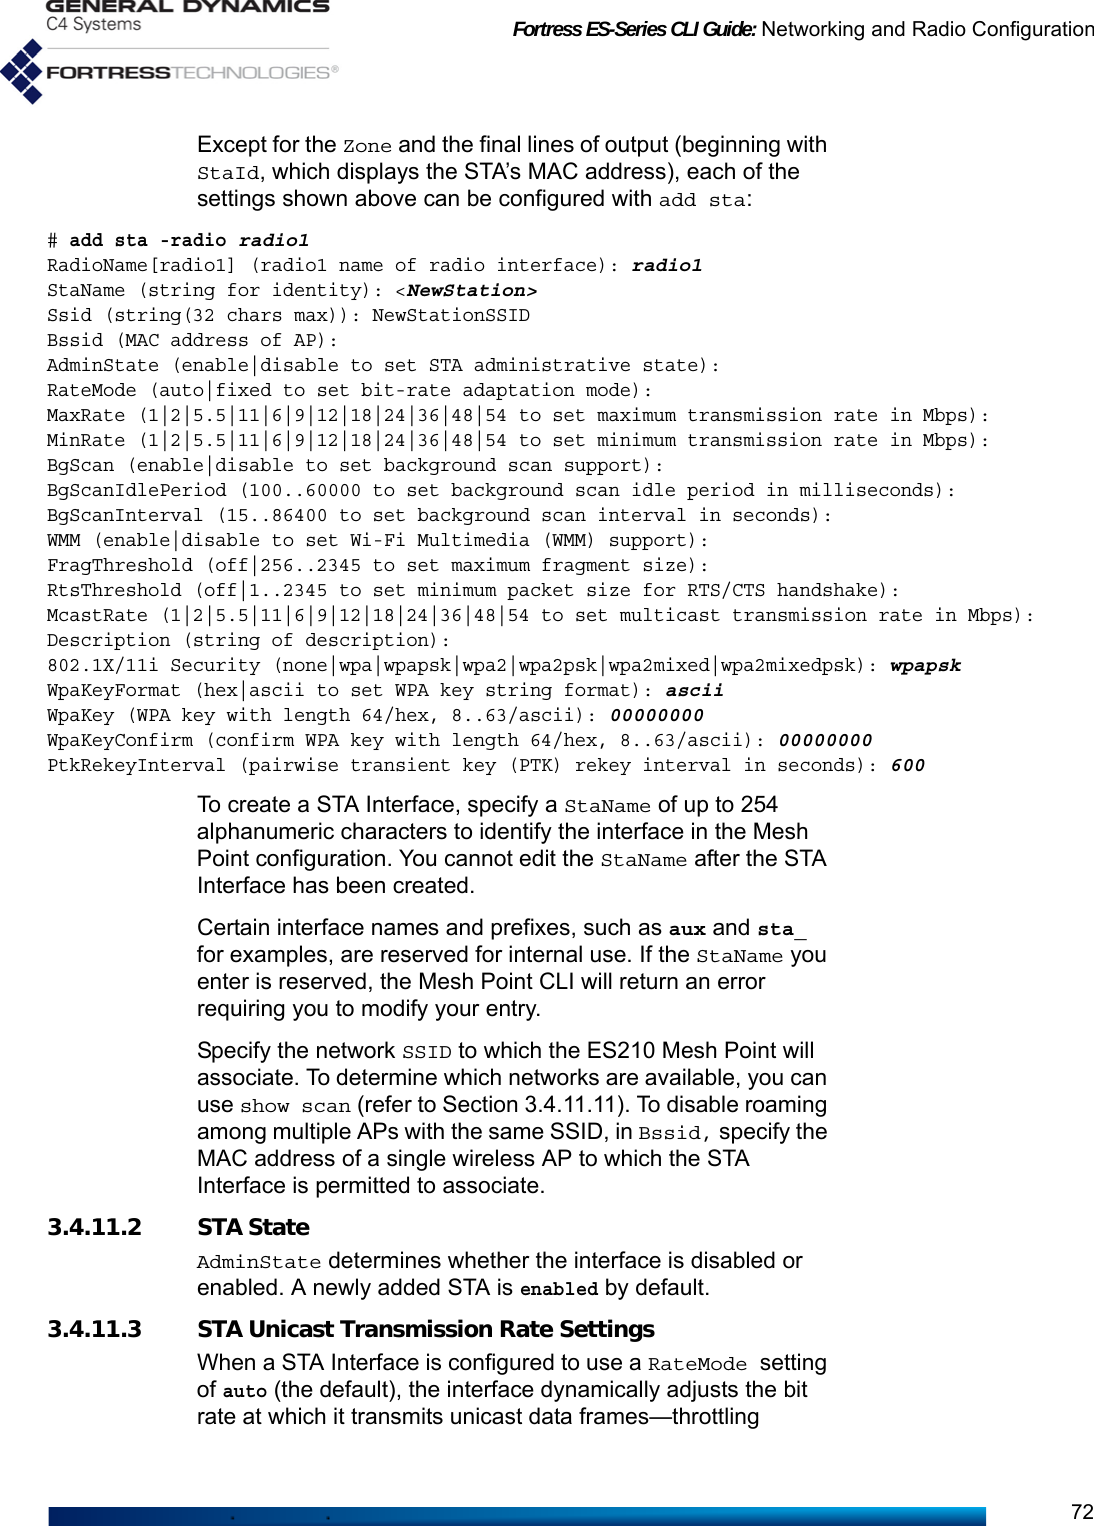 Fortress ES-Series CLI Guide: Networking and Radio Configuration72Except for the Zone and the final lines of output (beginning with StaId, which displays the STA’s MAC address), each of the settings shown above can be configured with add sta: # add sta -radio radio1RadioName[radio1] (radio1 name of radio interface): radio1StaName (string for identity): &lt;NewStation&gt;Ssid (string(32 chars max)): NewStationSSIDBssid (MAC address of AP):AdminState (enable|disable to set STA administrative state):RateMode (auto|fixed to set bit-rate adaptation mode):MaxRate (1|2|5.5|11|6|9|12|18|24|36|48|54 to set maximum transmission rate in Mbps):MinRate (1|2|5.5|11|6|9|12|18|24|36|48|54 to set minimum transmission rate in Mbps):BgScan (enable|disable to set background scan support):BgScanIdlePeriod (100..60000 to set background scan idle period in milliseconds):BgScanInterval (15..86400 to set background scan interval in seconds):WMM (enable|disable to set Wi-Fi Multimedia (WMM) support):FragThreshold (off|256..2345 to set maximum fragment size):RtsThreshold (off|1..2345 to set minimum packet size for RTS/CTS handshake):McastRate (1|2|5.5|11|6|9|12|18|24|36|48|54 to set multicast transmission rate in Mbps):Description (string of description):802.1X/11i Security (none|wpa|wpapsk|wpa2|wpa2psk|wpa2mixed|wpa2mixedpsk): wpapskWpaKeyFormat (hex|ascii to set WPA key string format): asciiWpaKey (WPA key with length 64/hex, 8..63/ascii): 00000000WpaKeyConfirm (confirm WPA key with length 64/hex, 8..63/ascii): 00000000PtkRekeyInterval (pairwise transient key (PTK) rekey interval in seconds): 600To create a STA Interface, specify a StaName of up to 254 alphanumeric characters to identify the interface in the Mesh Point configuration. You cannot edit the StaName after the STA Interface has been created. Certain interface names and prefixes, such as aux and sta_ for examples, are reserved for internal use. If the StaName you enter is reserved, the Mesh Point CLI will return an error requiring you to modify your entry.Specify the network SSID to which the ES210 Mesh Point will associate. To determine which networks are available, you can use show scan (refer to Section 3.4.11.11). To disable roaming among multiple APs with the same SSID, in Bssid, specify the MAC address of a single wireless AP to which the STA Interface is permitted to associate.3.4.11.2 STA StateAdminState determines whether the interface is disabled or enabled. A newly added STA is enabled by default. 3.4.11.3 STA Unicast Transmission Rate SettingsWhen a STA Interface is configured to use a RateMode setting of auto (the default), the interface dynamically adjusts the bit rate at which it transmits unicast data frames—throttling 